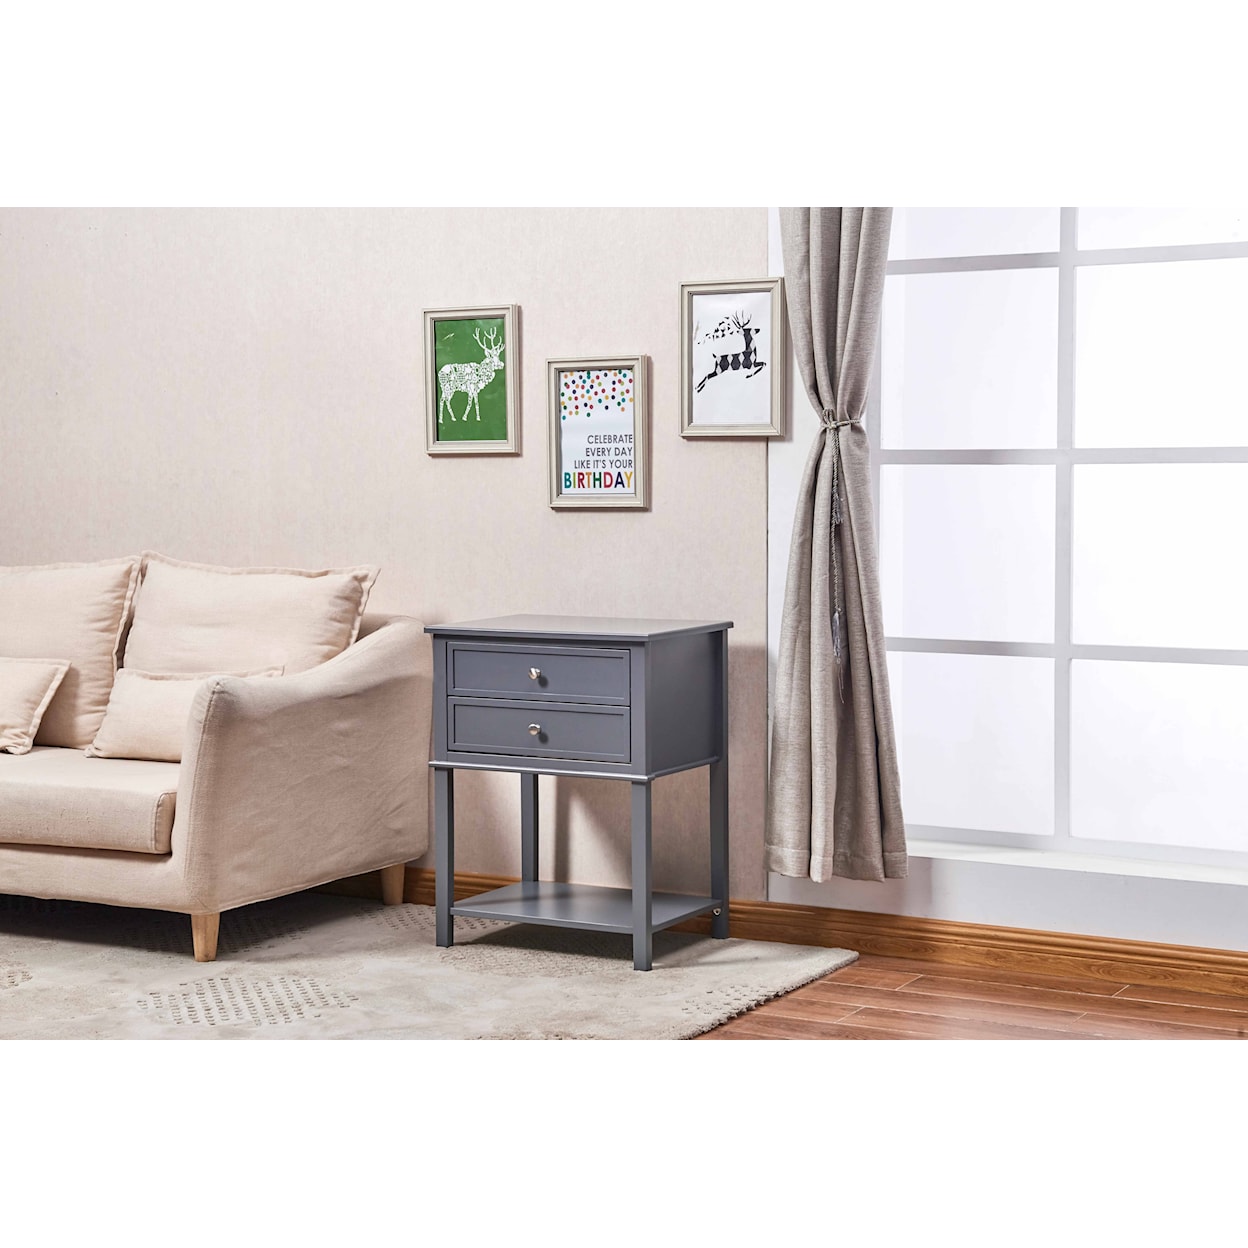 Milton Greens Stars Side Table GREY SIDE TABLE WITH 2 DRAWERS & | BOTTOM SH